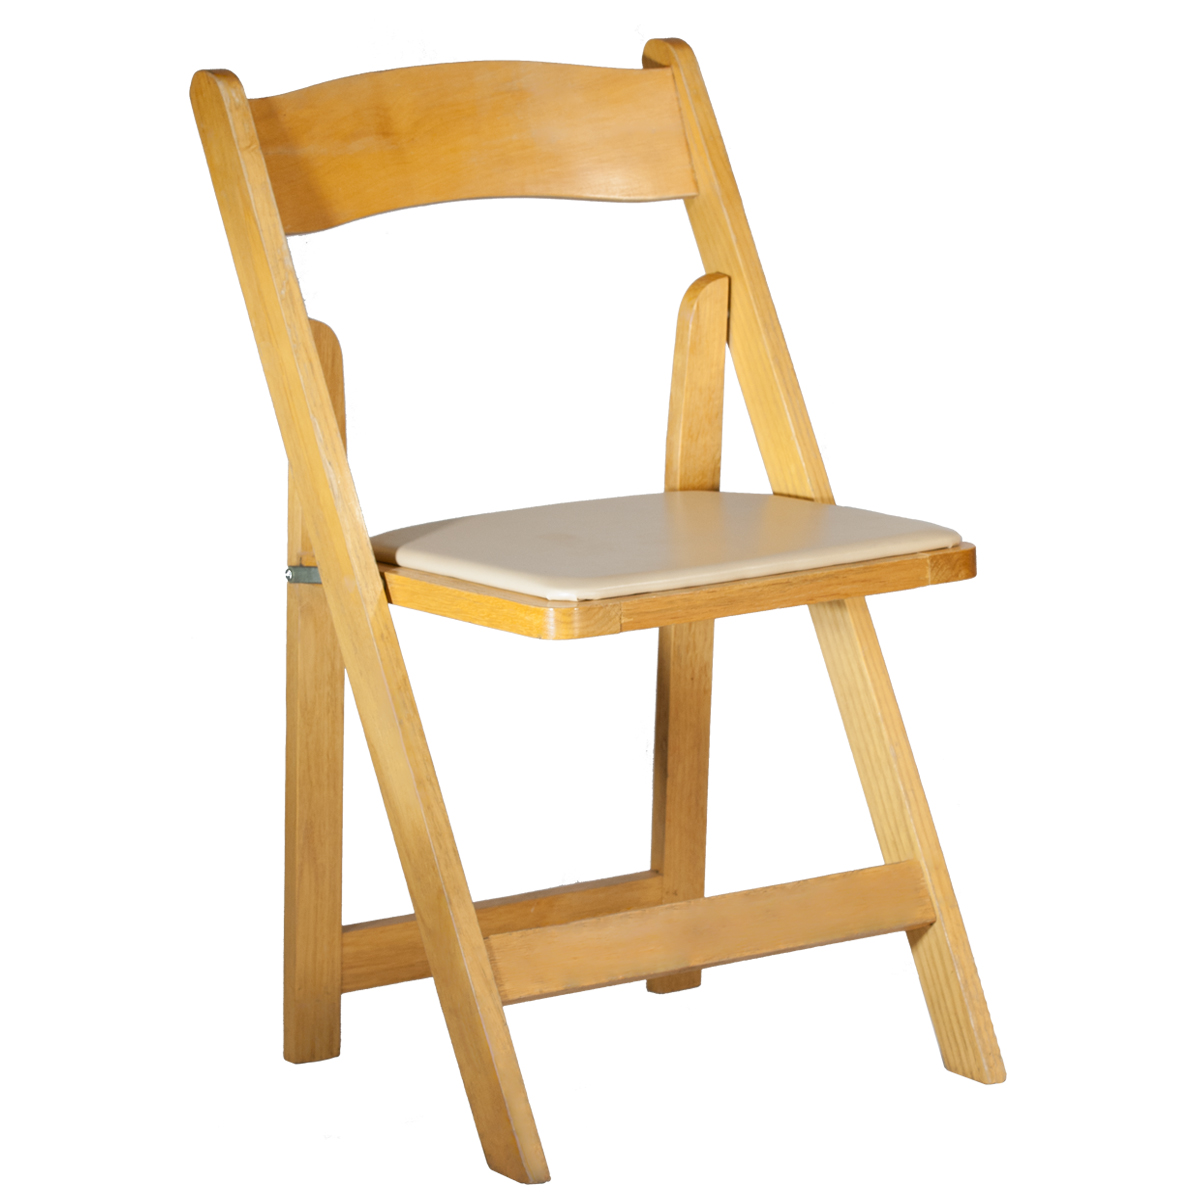 NATURAL WOOD RESIN FOLDING CHAIR 